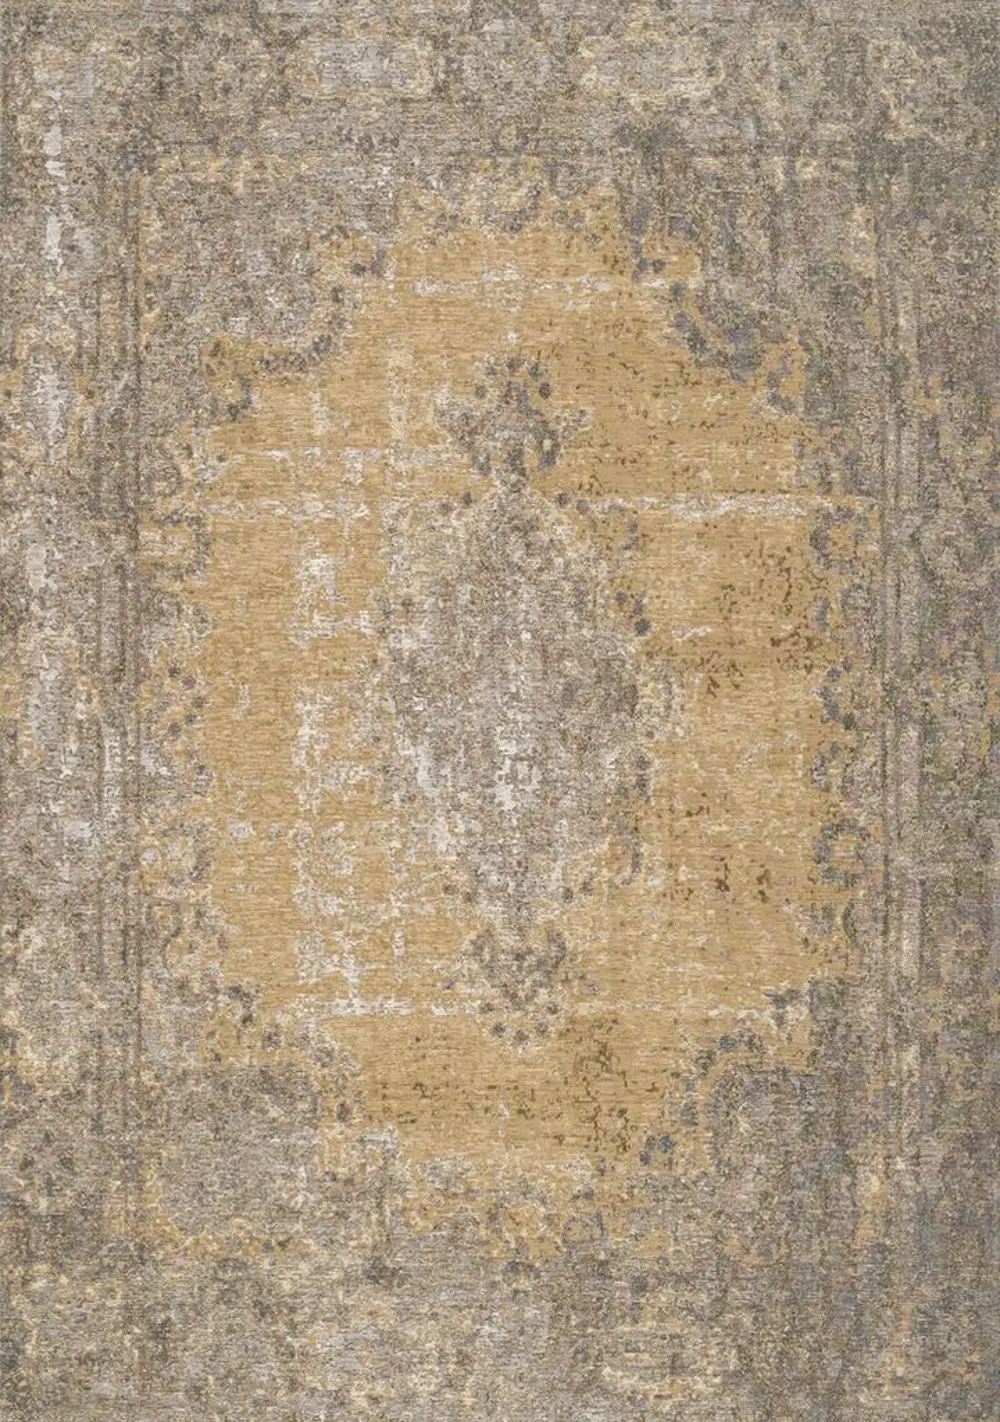 5 x 8 Medium Distressed Yellow and Gray Area Rug - Cathedral-1